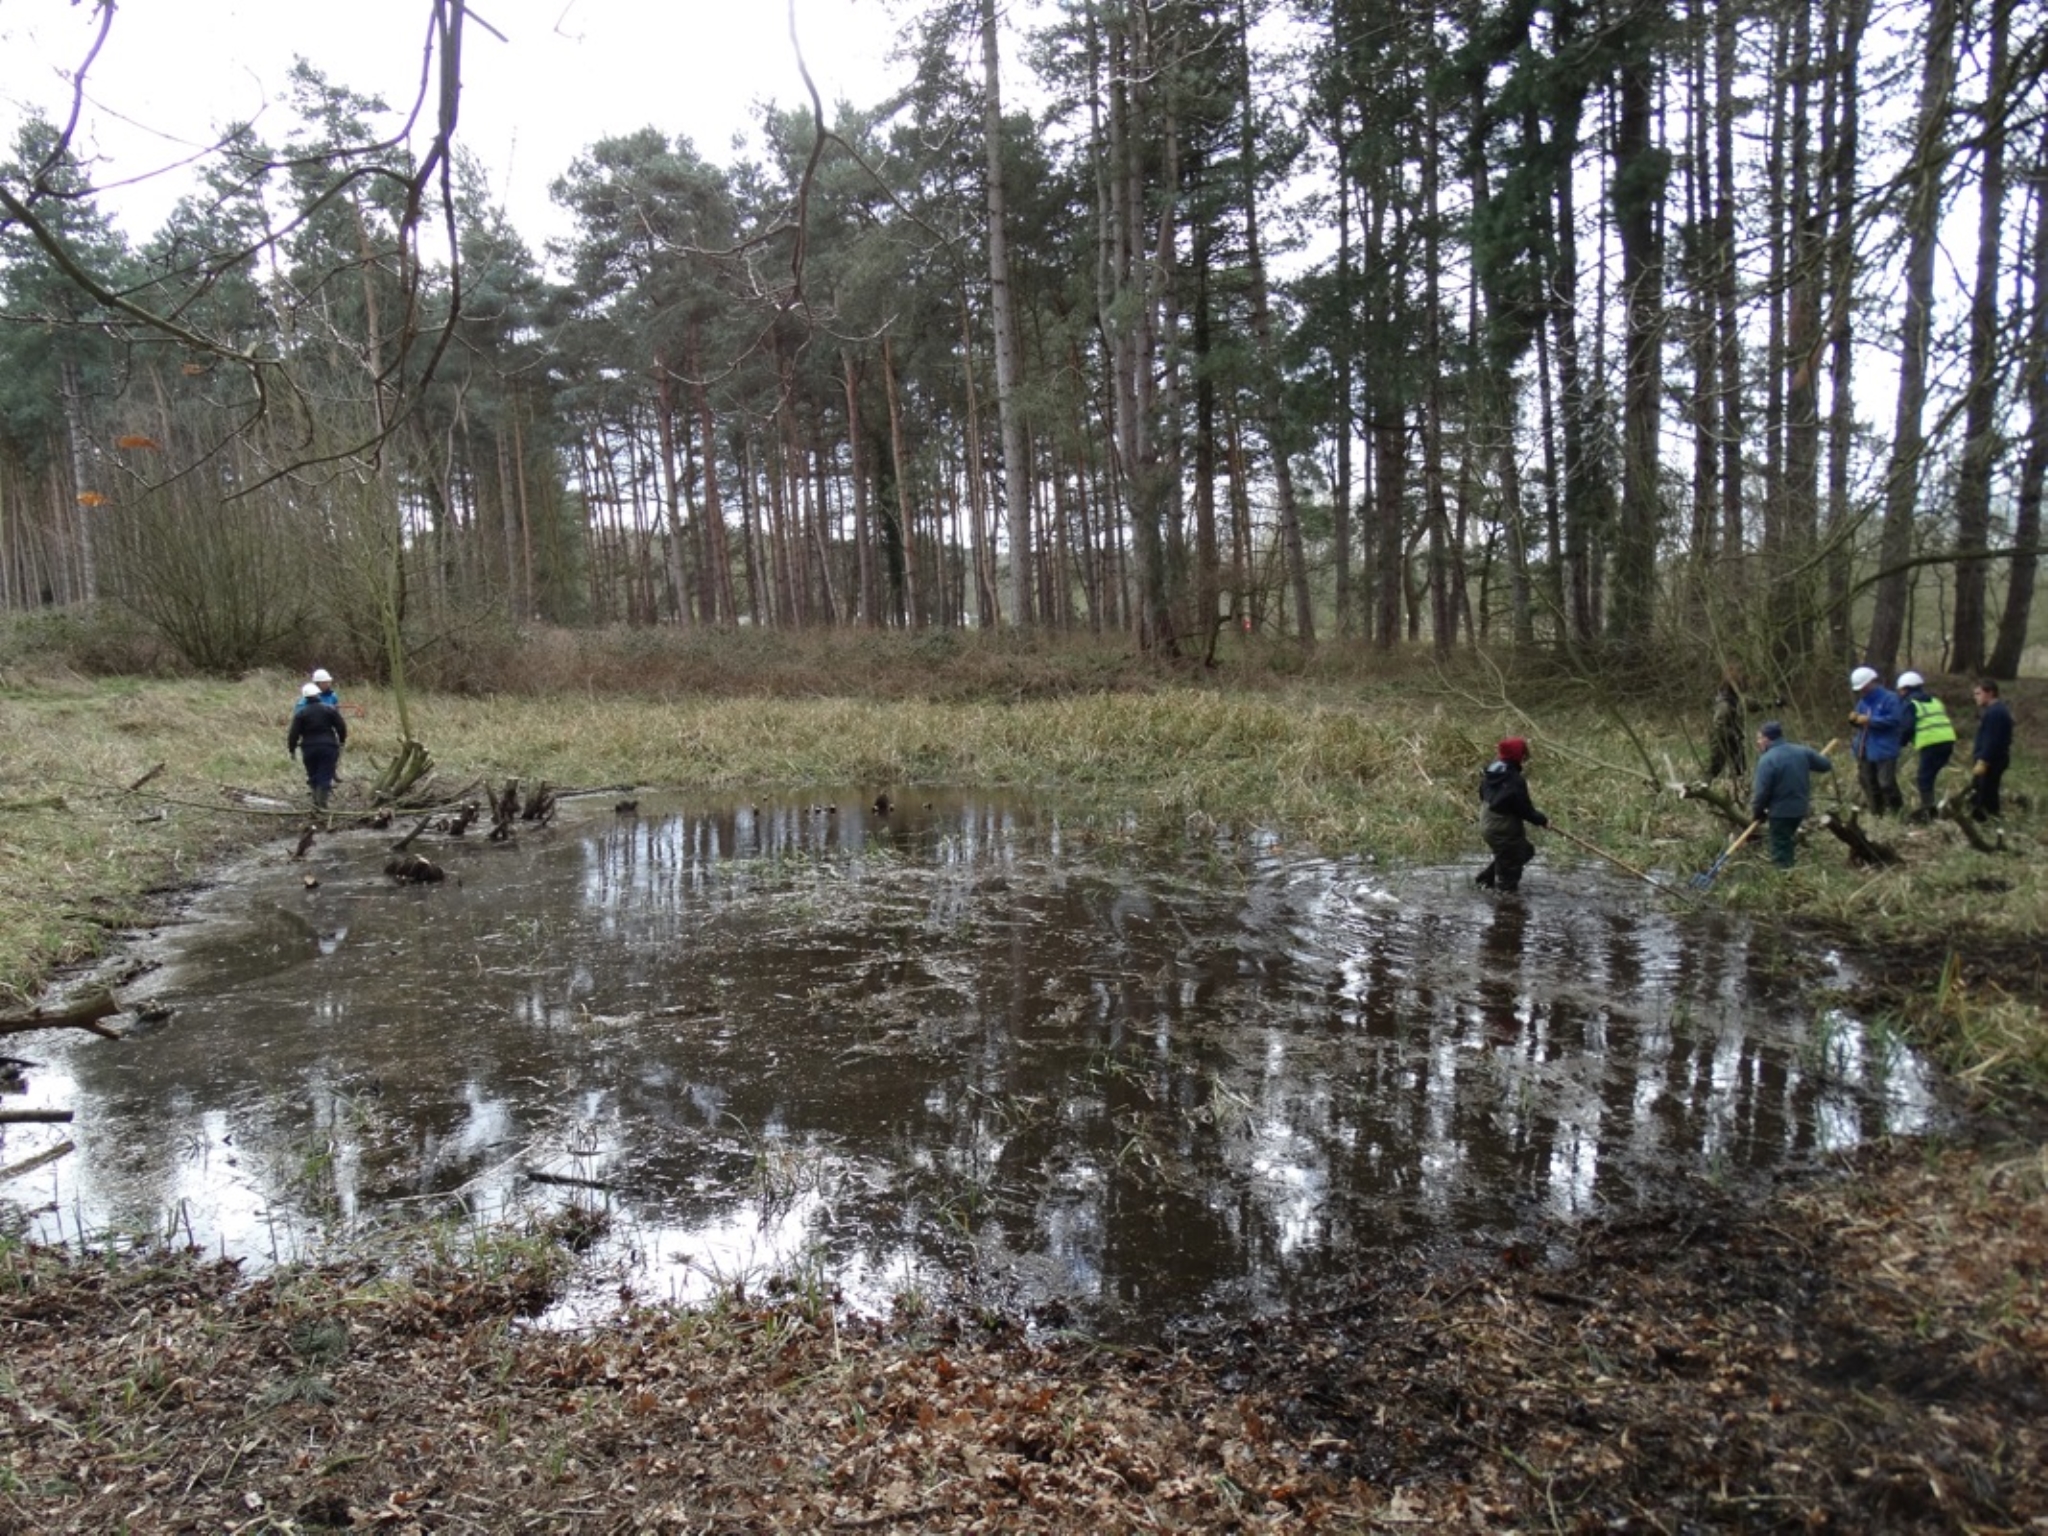 A photo from the FoTF Conservation Event - March 2019 - Clearance work around, and in, the ponds at Harling Woods, Harling : A photo of one of the ponds at Harling Woods, with volunteers working on edges